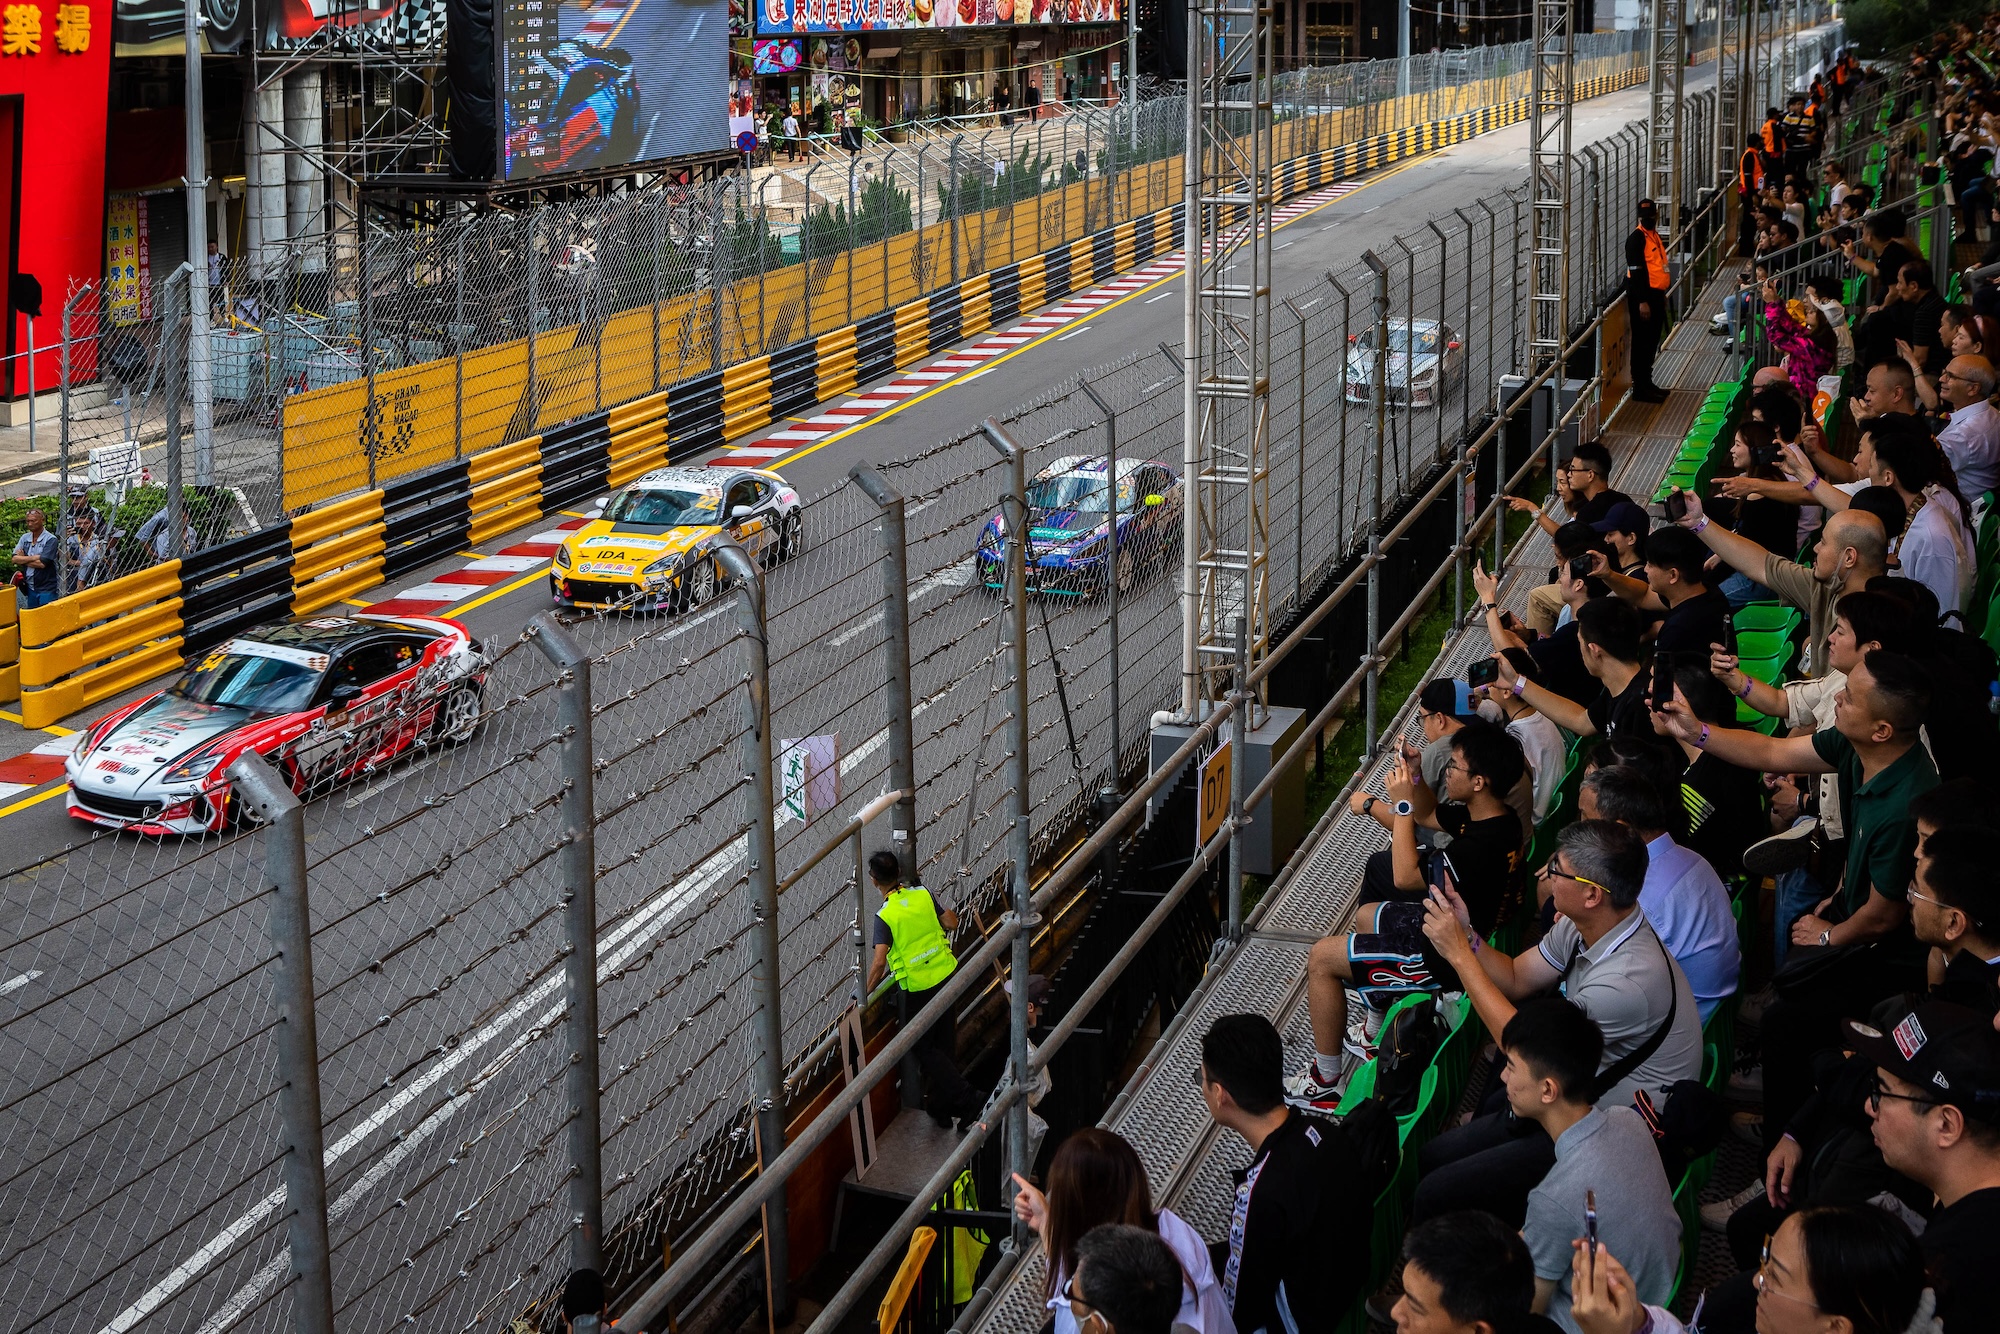 Members of the public follow the Macau Roadsports Challenge race from the spectator stands